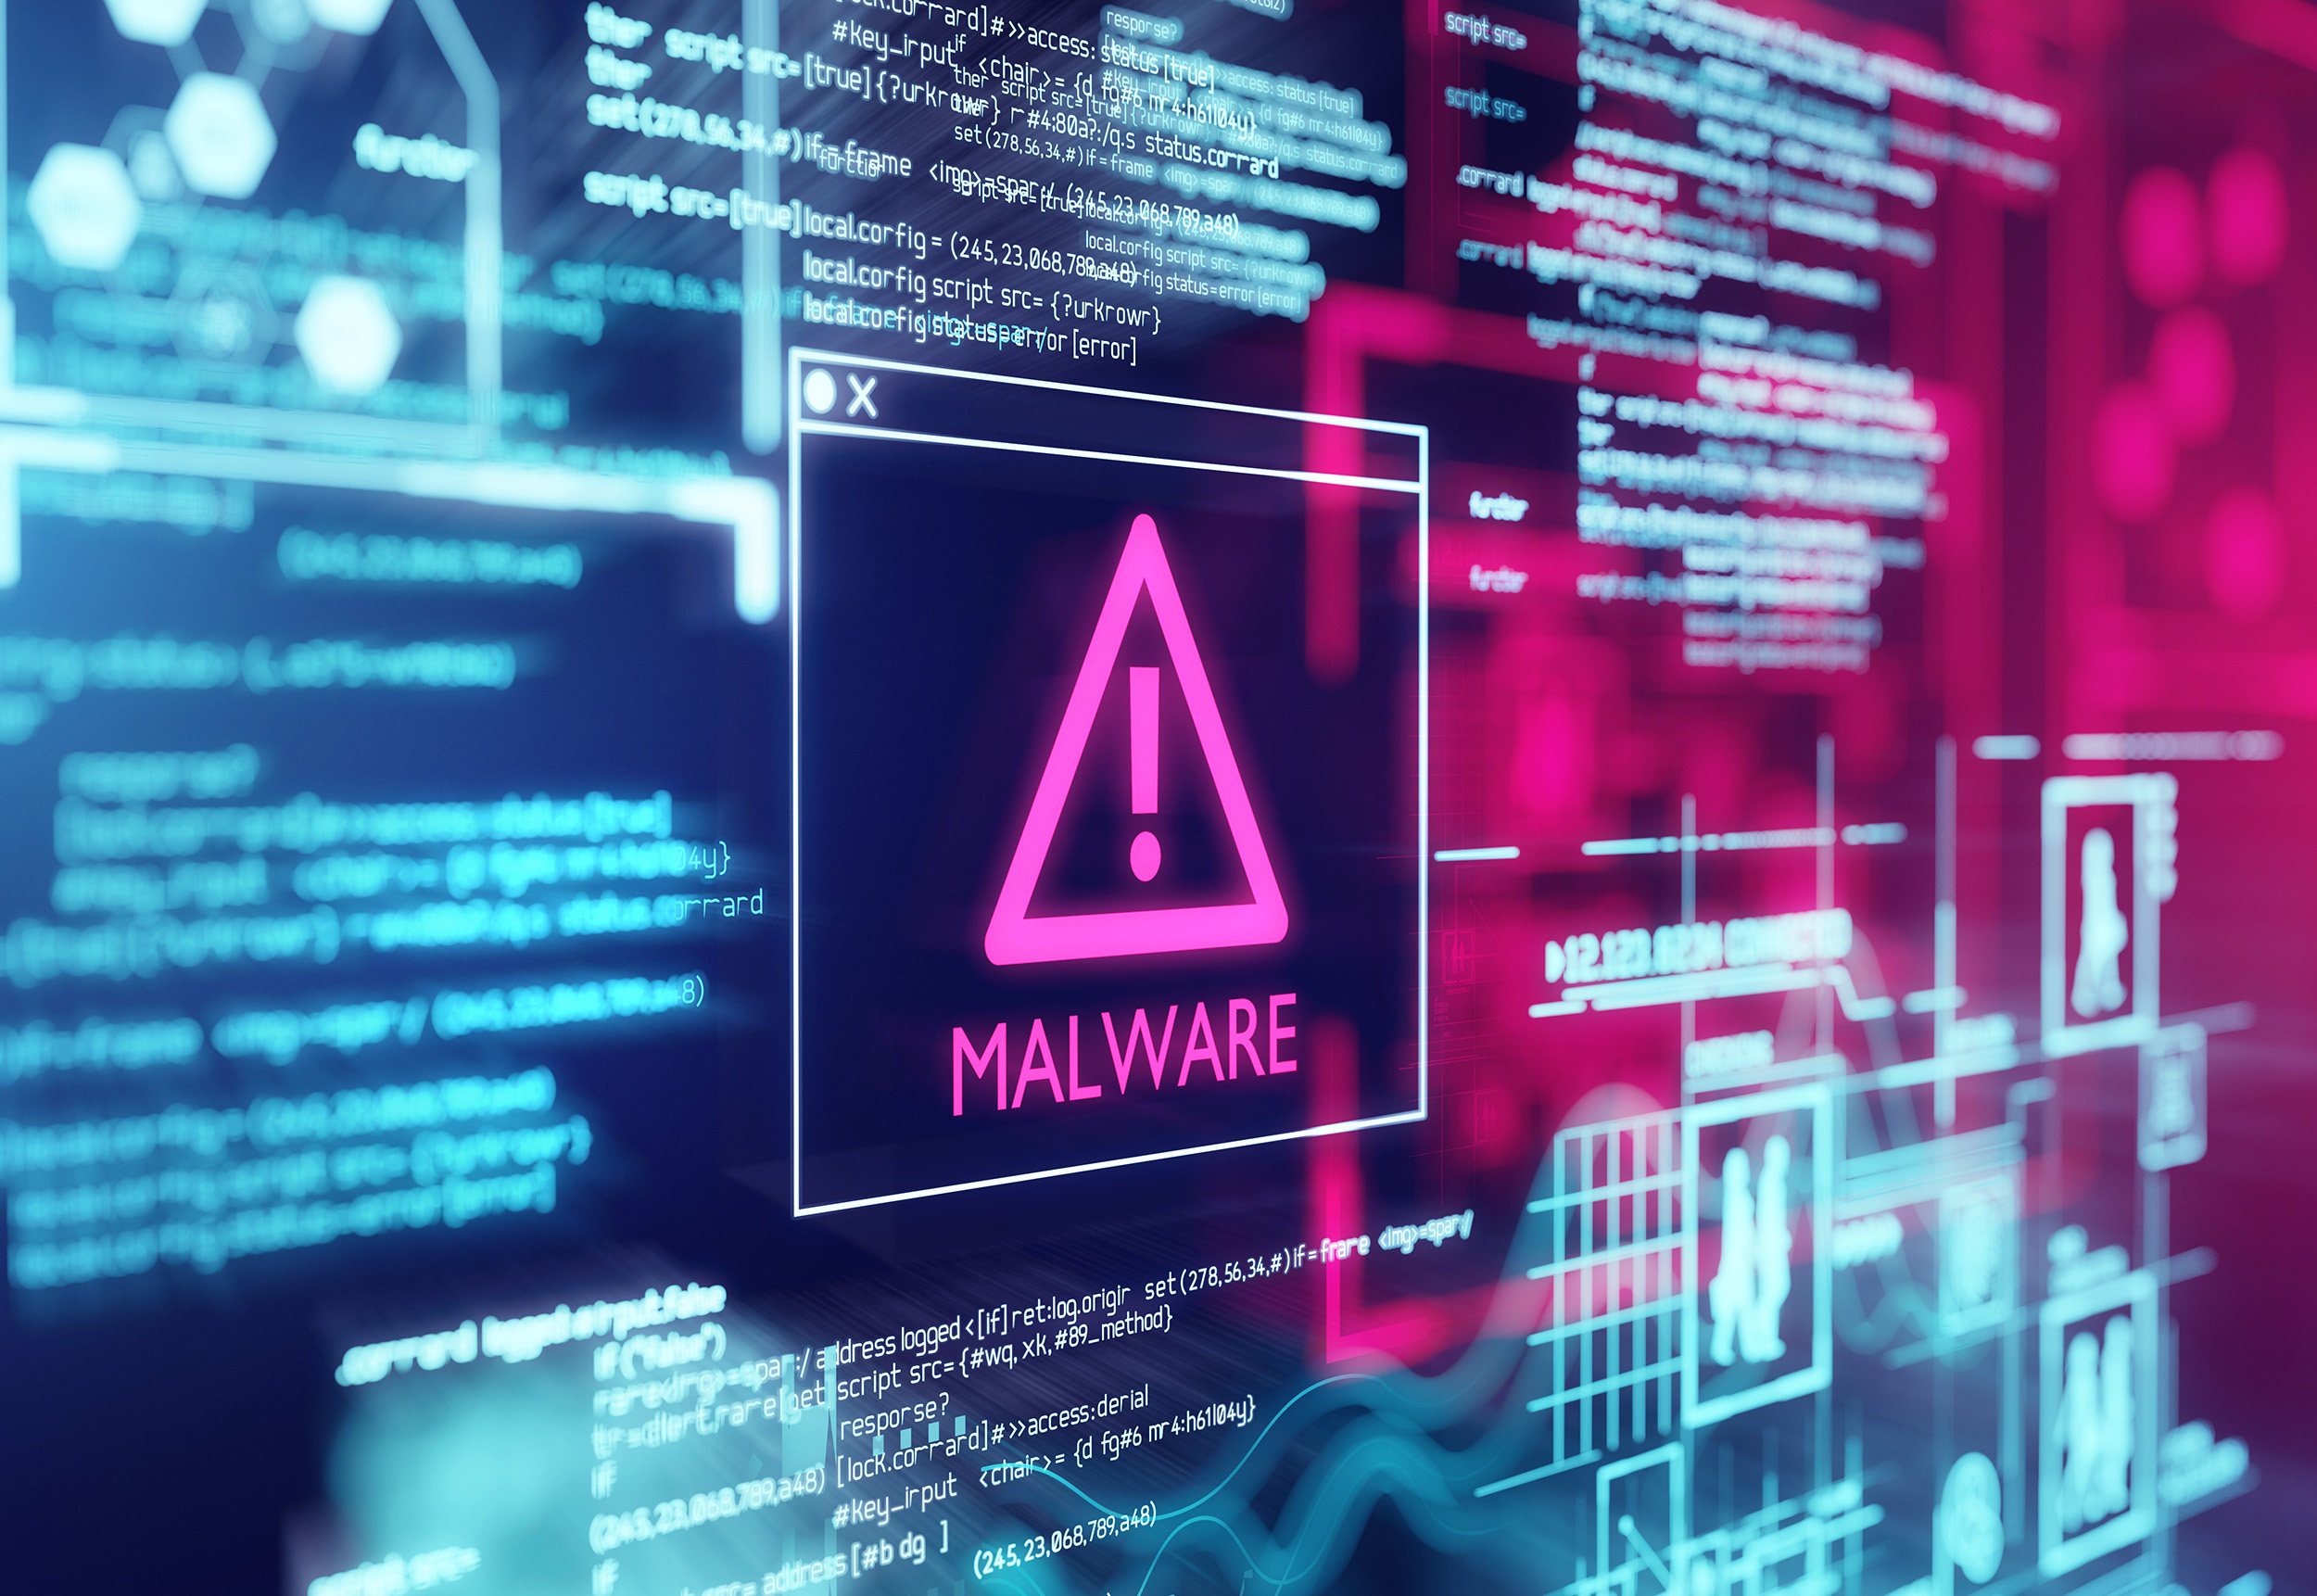 Authorities say Wang ran a network of malware-infected computers spread across nearly 200 countries. Photo: Shutterstock